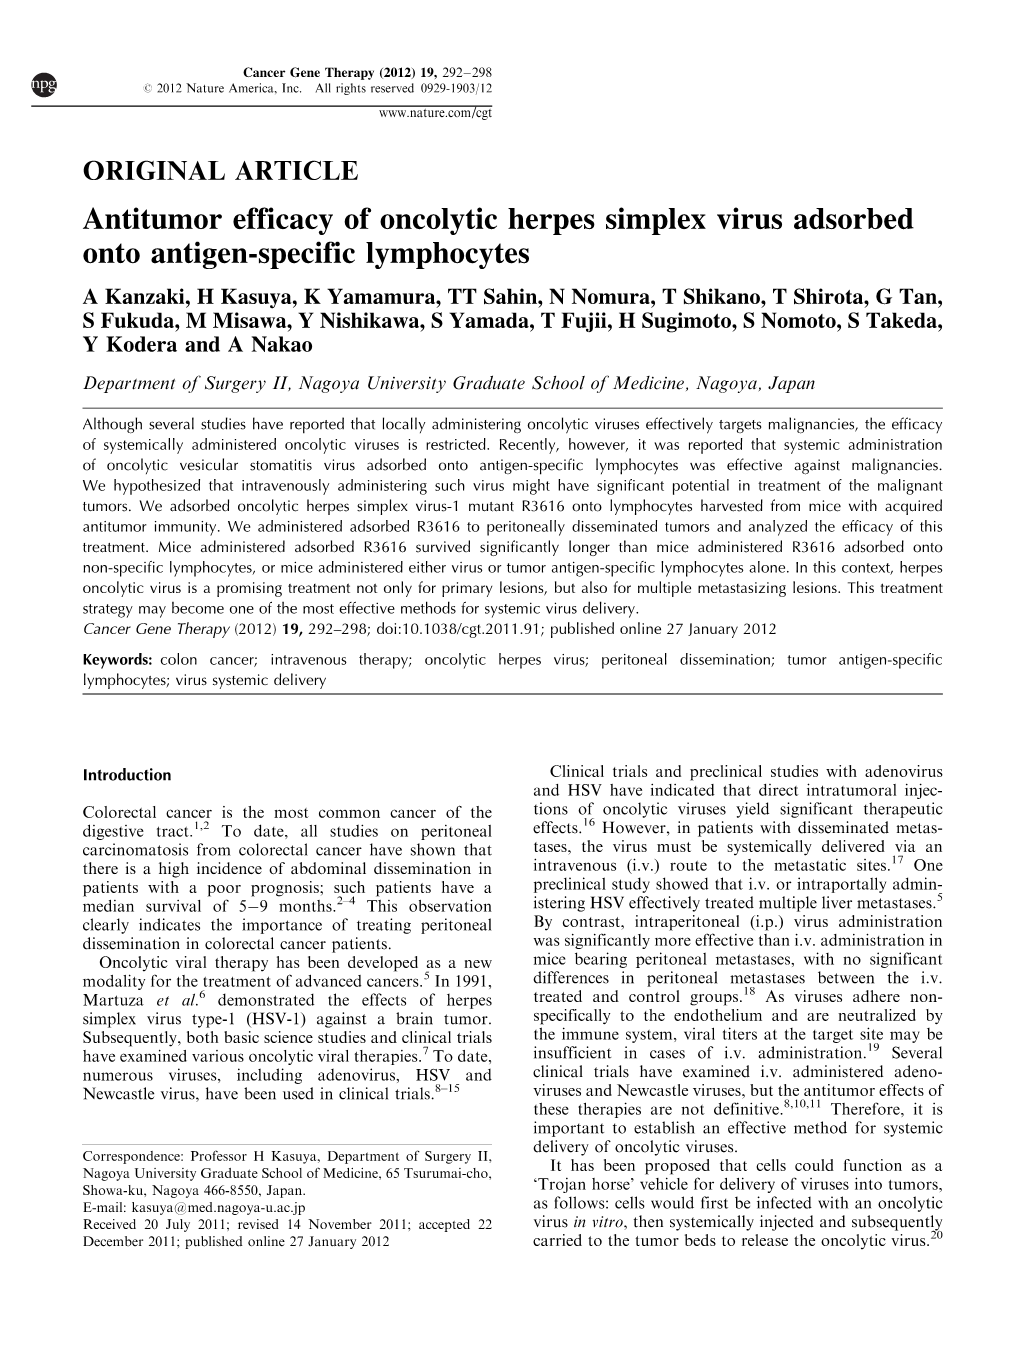 Antitumor Efficacy of Oncolytic Herpes Simplex Virus Adsorbed Onto